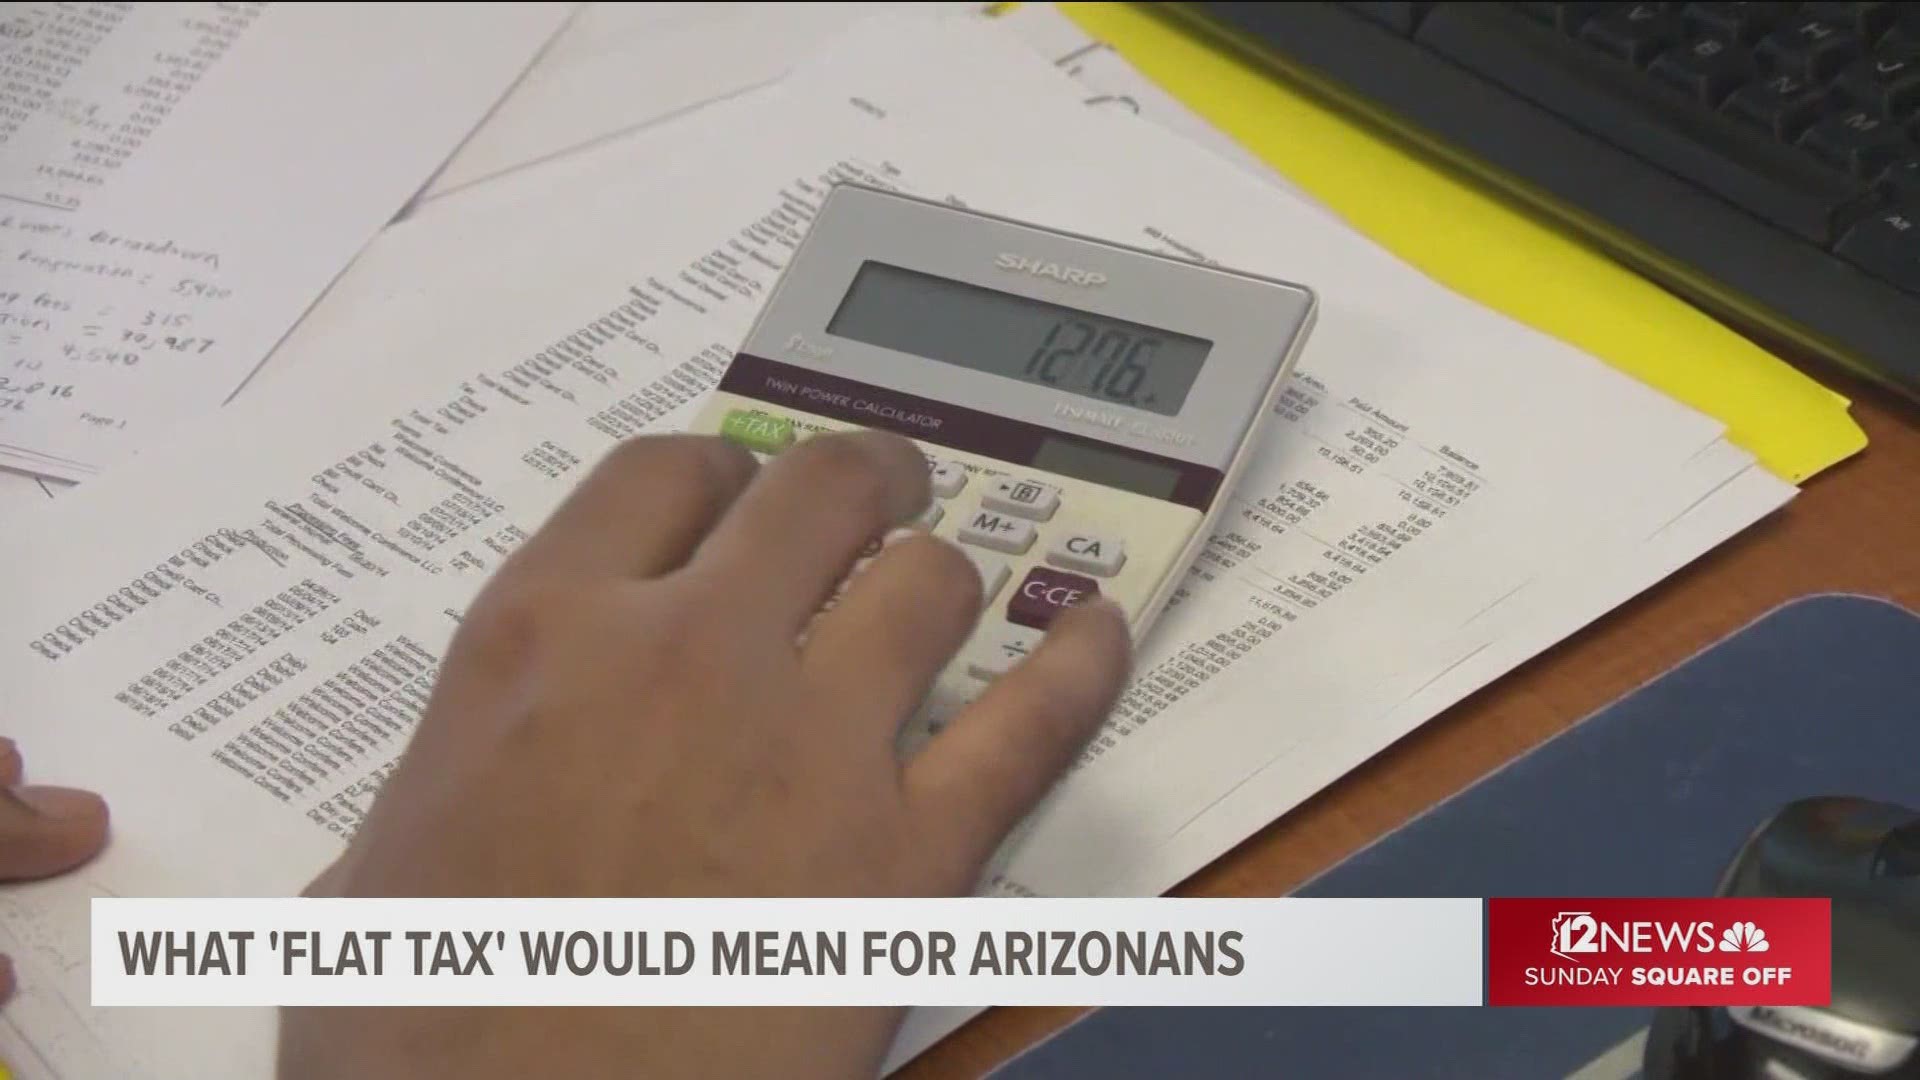 Capitol Republicans have been working behind the scene on a ‘flat tax’ – one income tax bracket for all Arizonans.